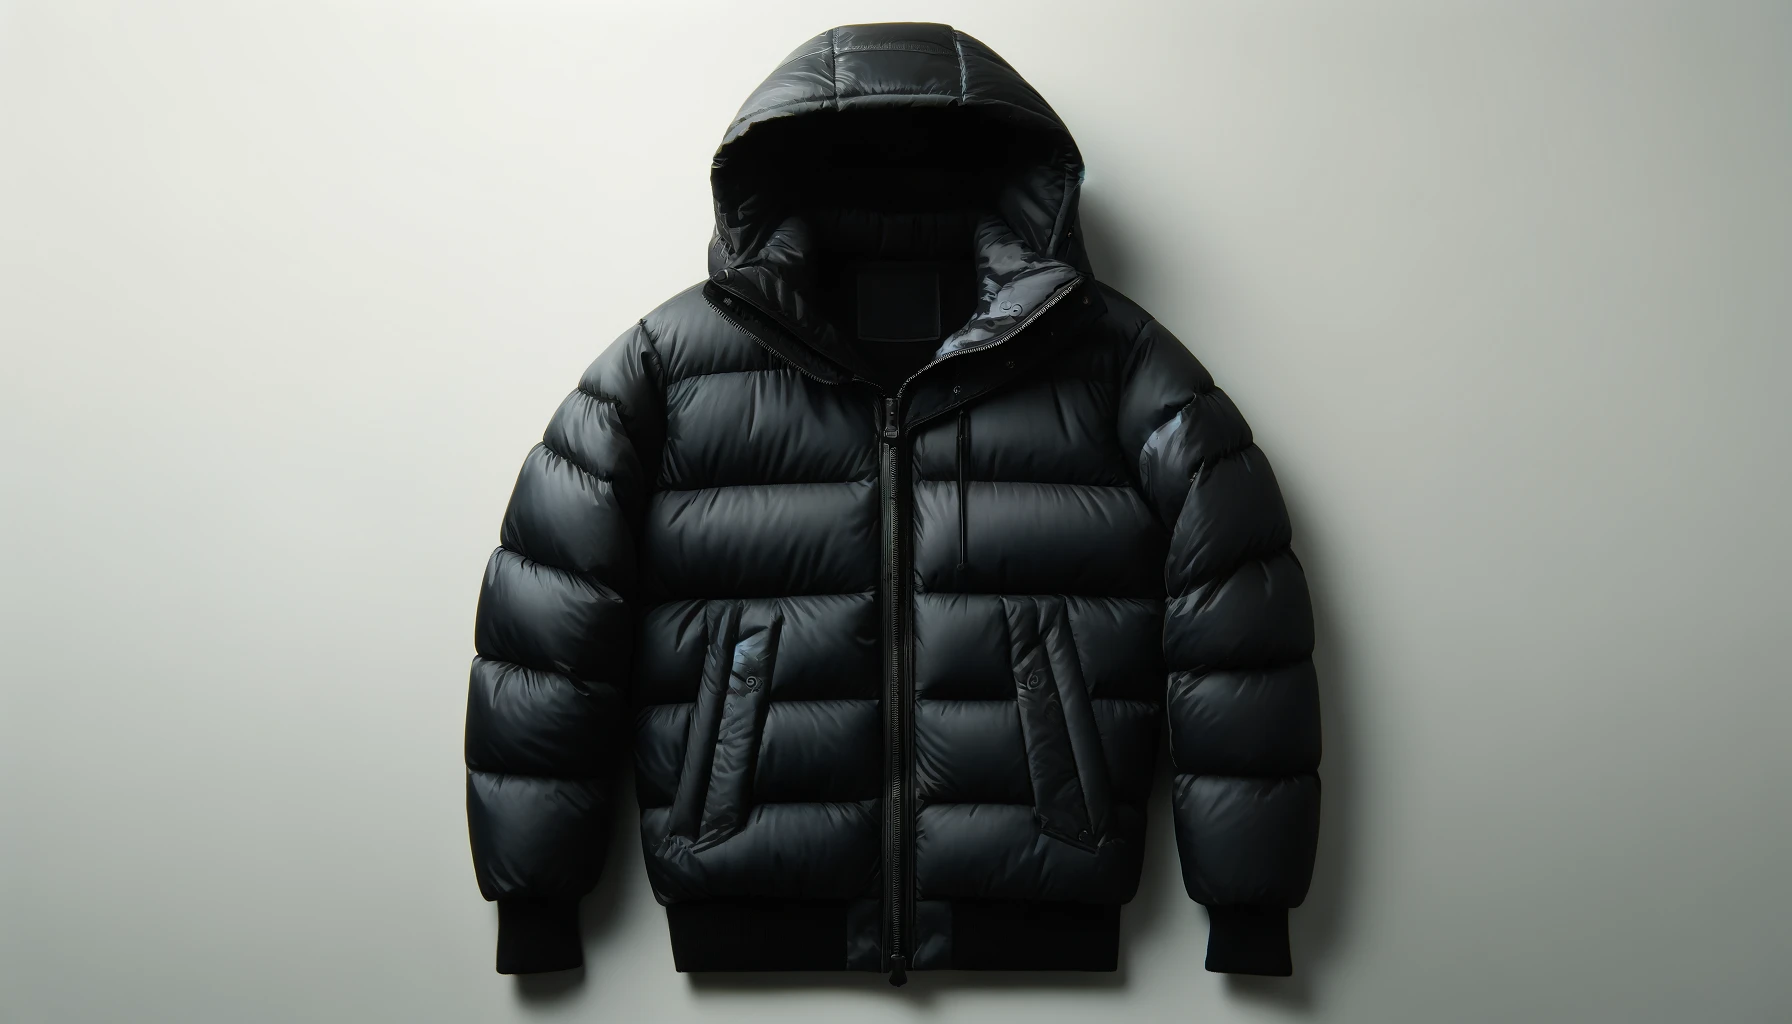 A hooded down jacket displayed on a plain background, showcasing its design and details.